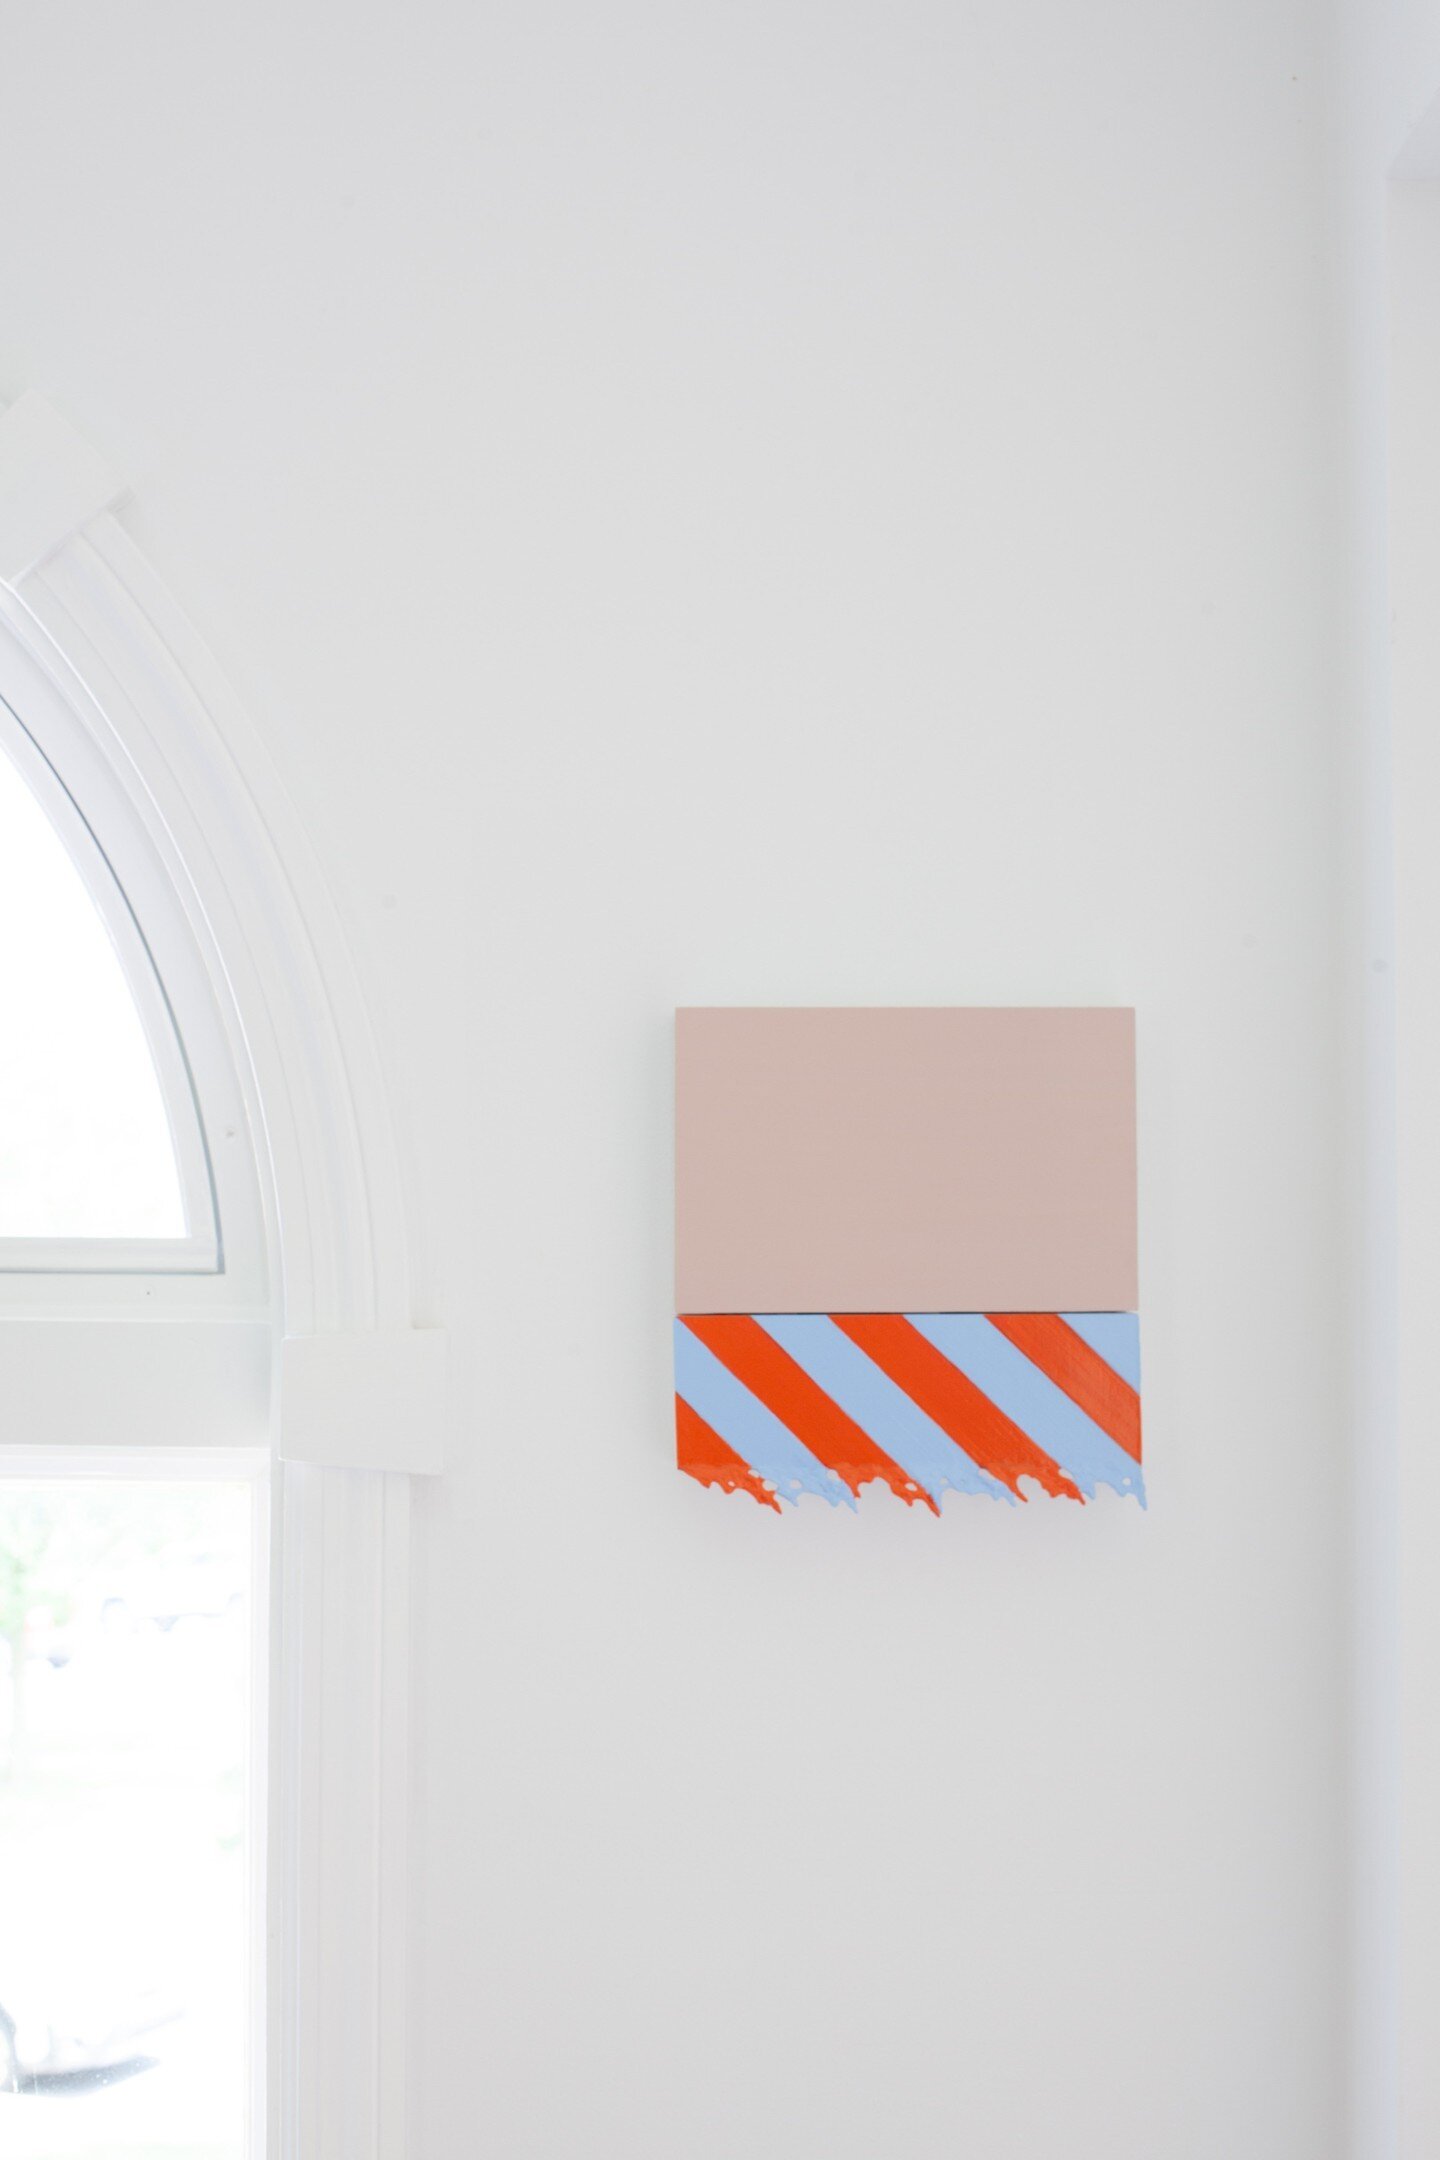 Painting by Francine Leclerq in Charm Phase.

Francine Leclerq
S-2022-pink_orange_light blue
2022
Acrylic on wood
11 x 9 inches

@francine.leclercq.ny

#francineleclerq #maakemag #maakeprojects